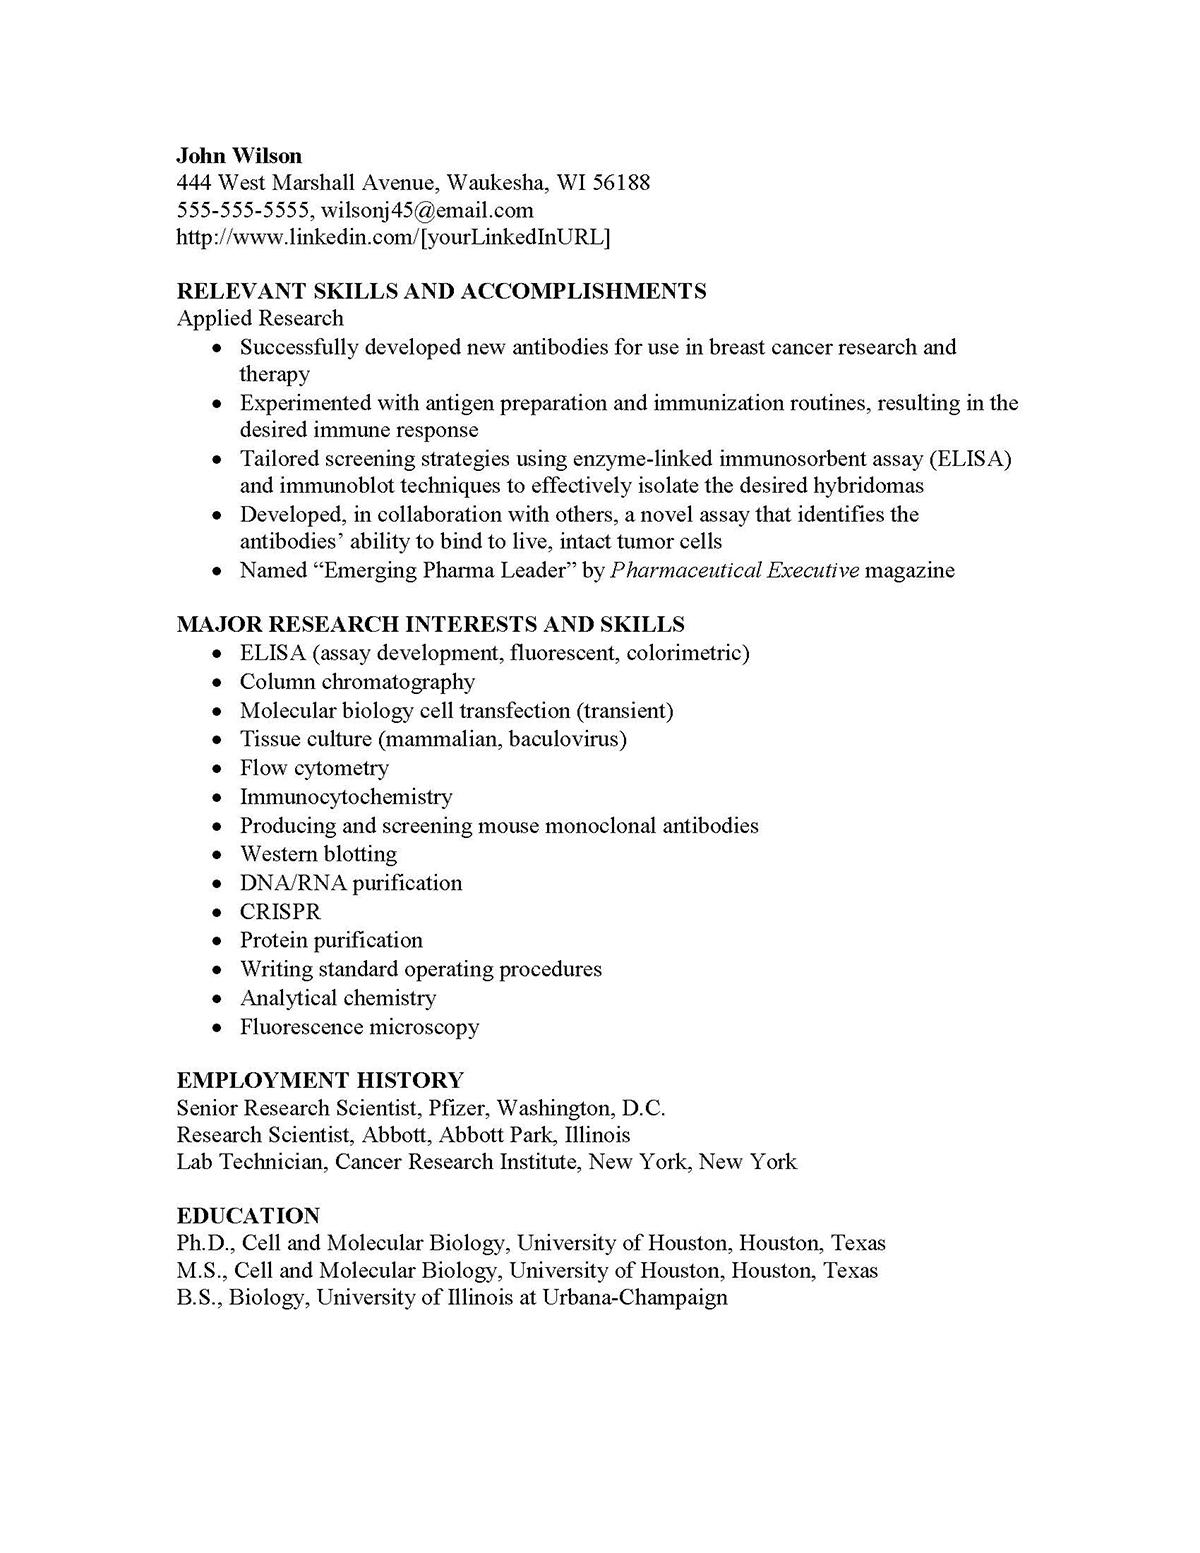 Sample resume: Pharmaceuticals, High Experience, Functional